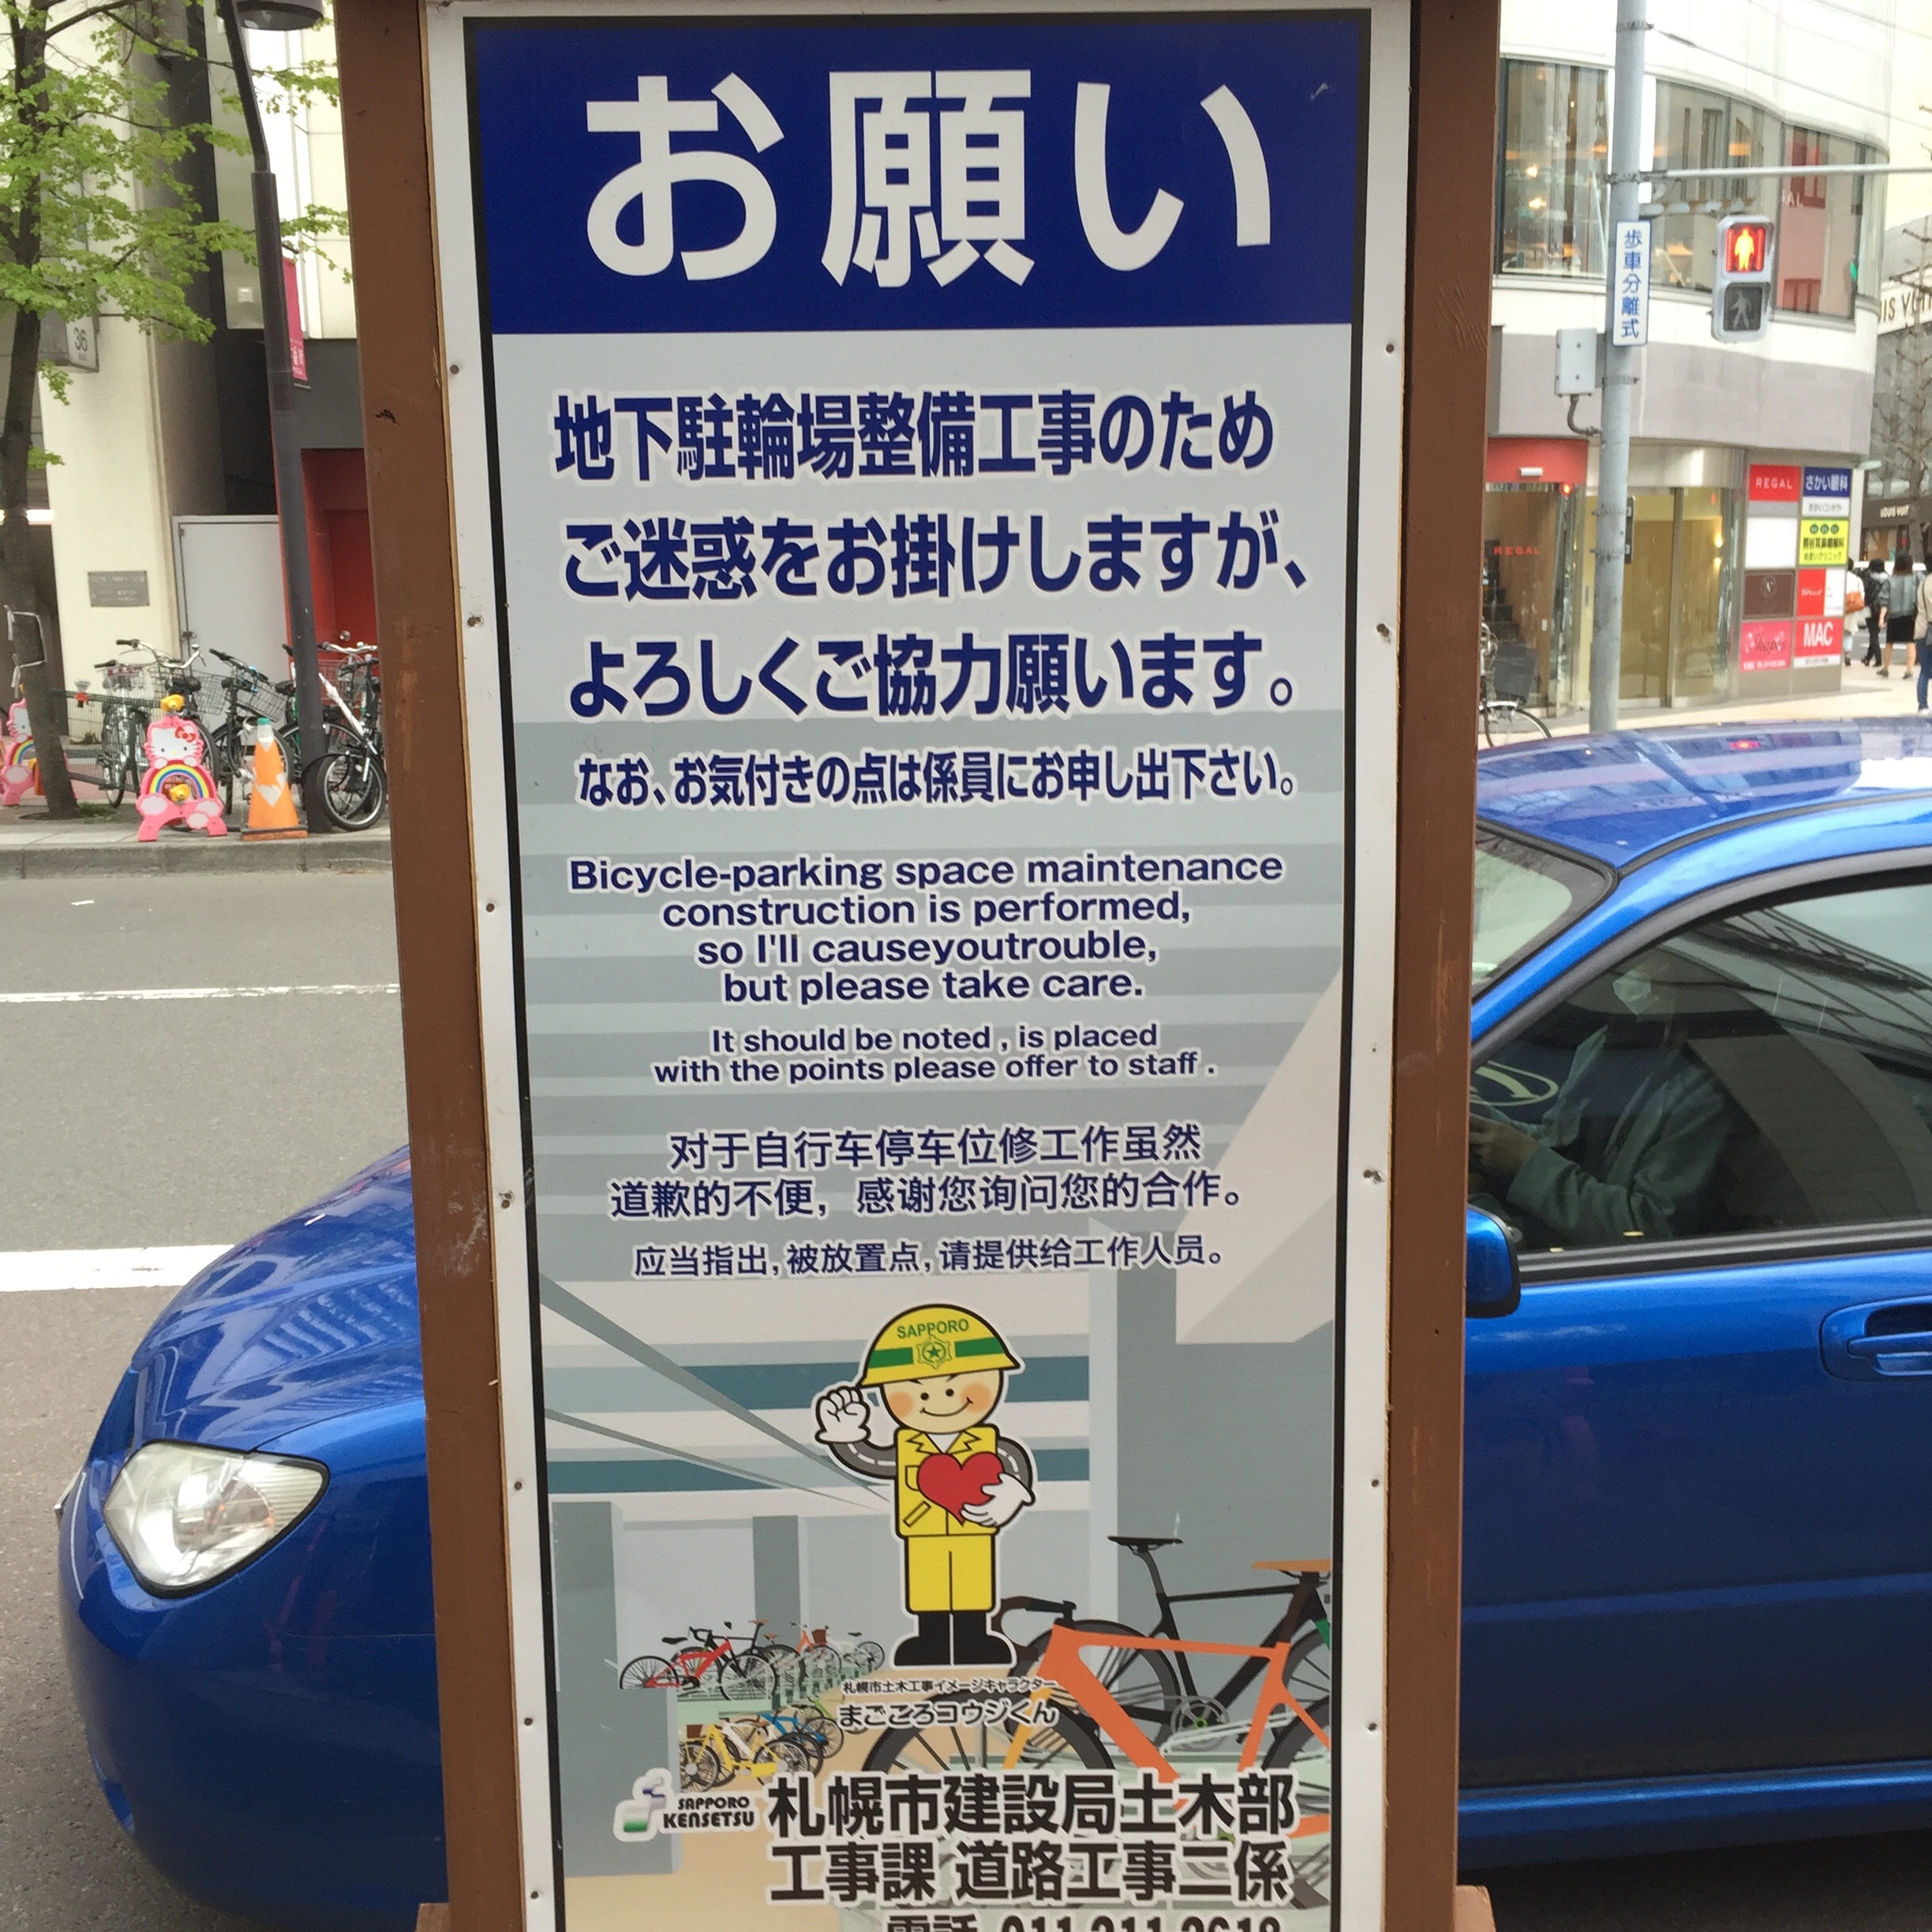 Garbled Sapporo sign produced from Japanese to English translation software